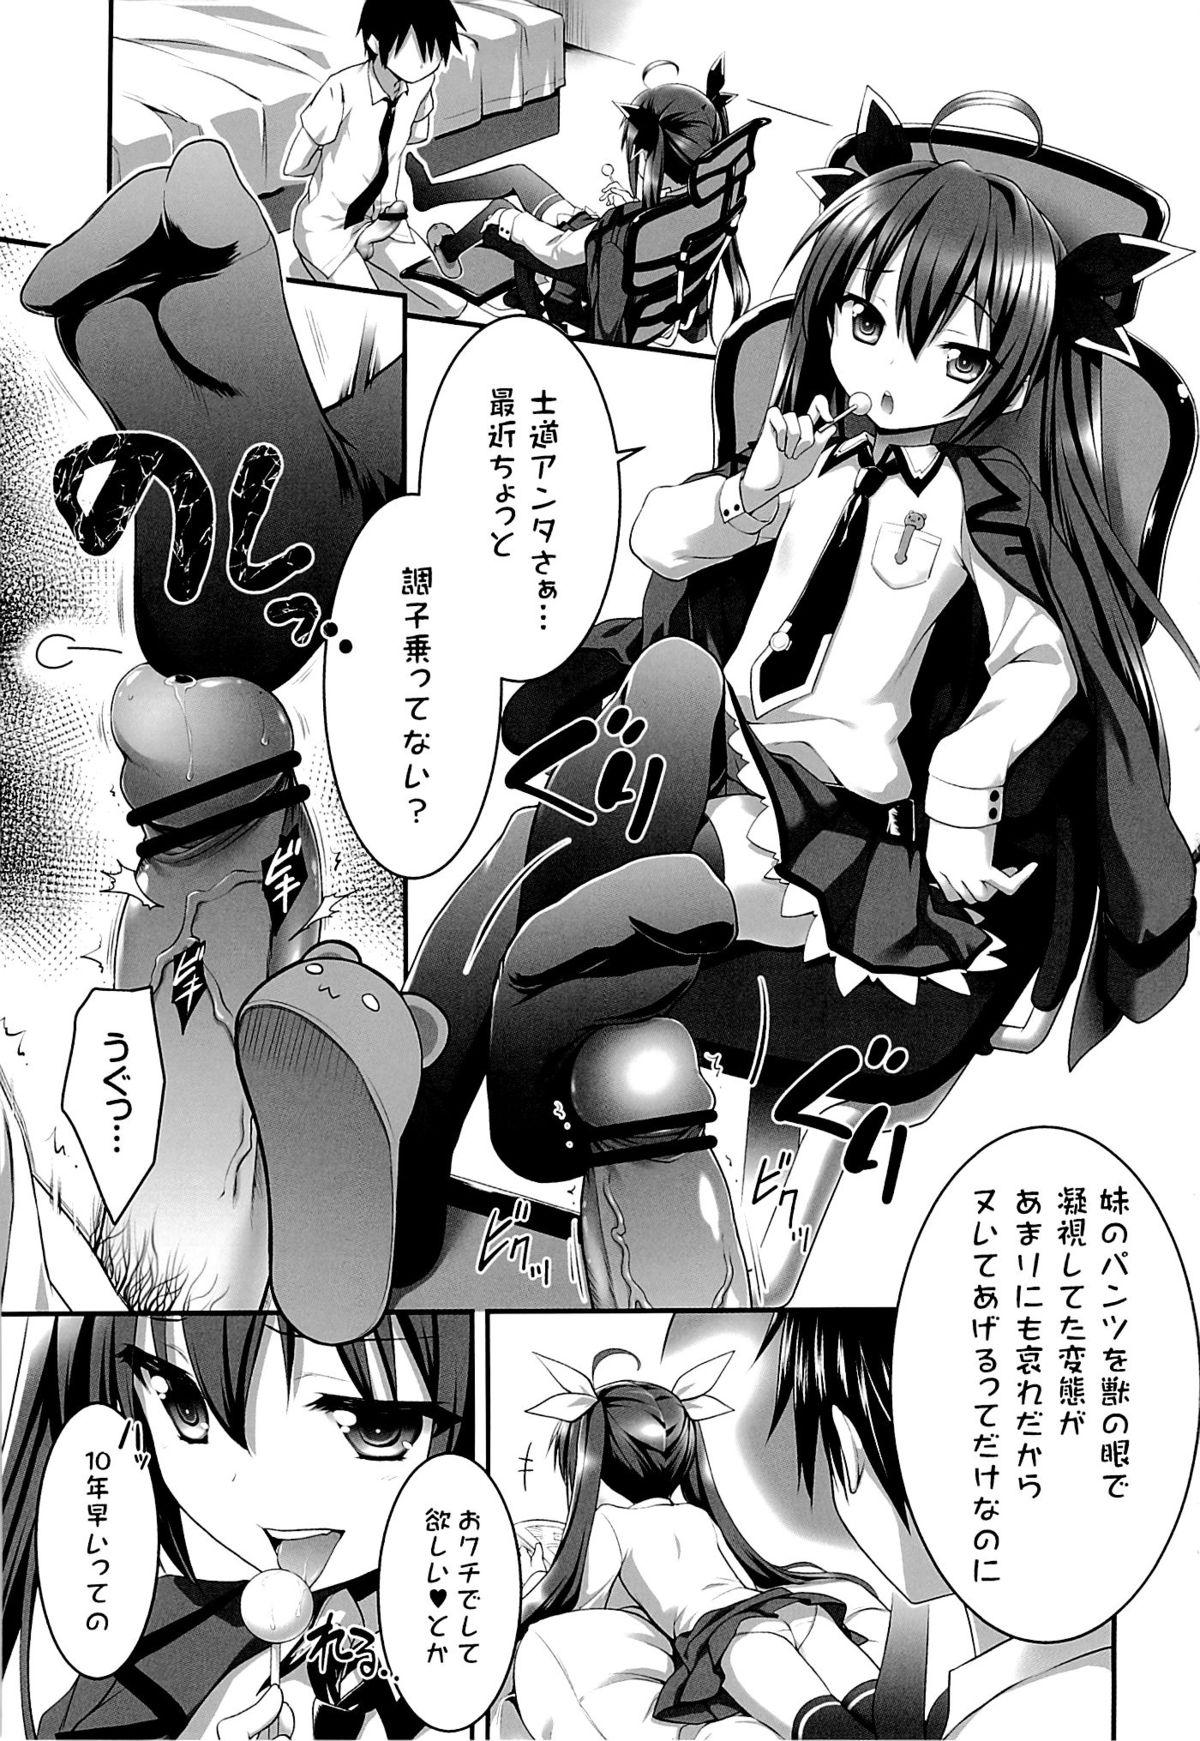 She HIGHSCHOOL OF THE DATE - Date a live New - Page 2